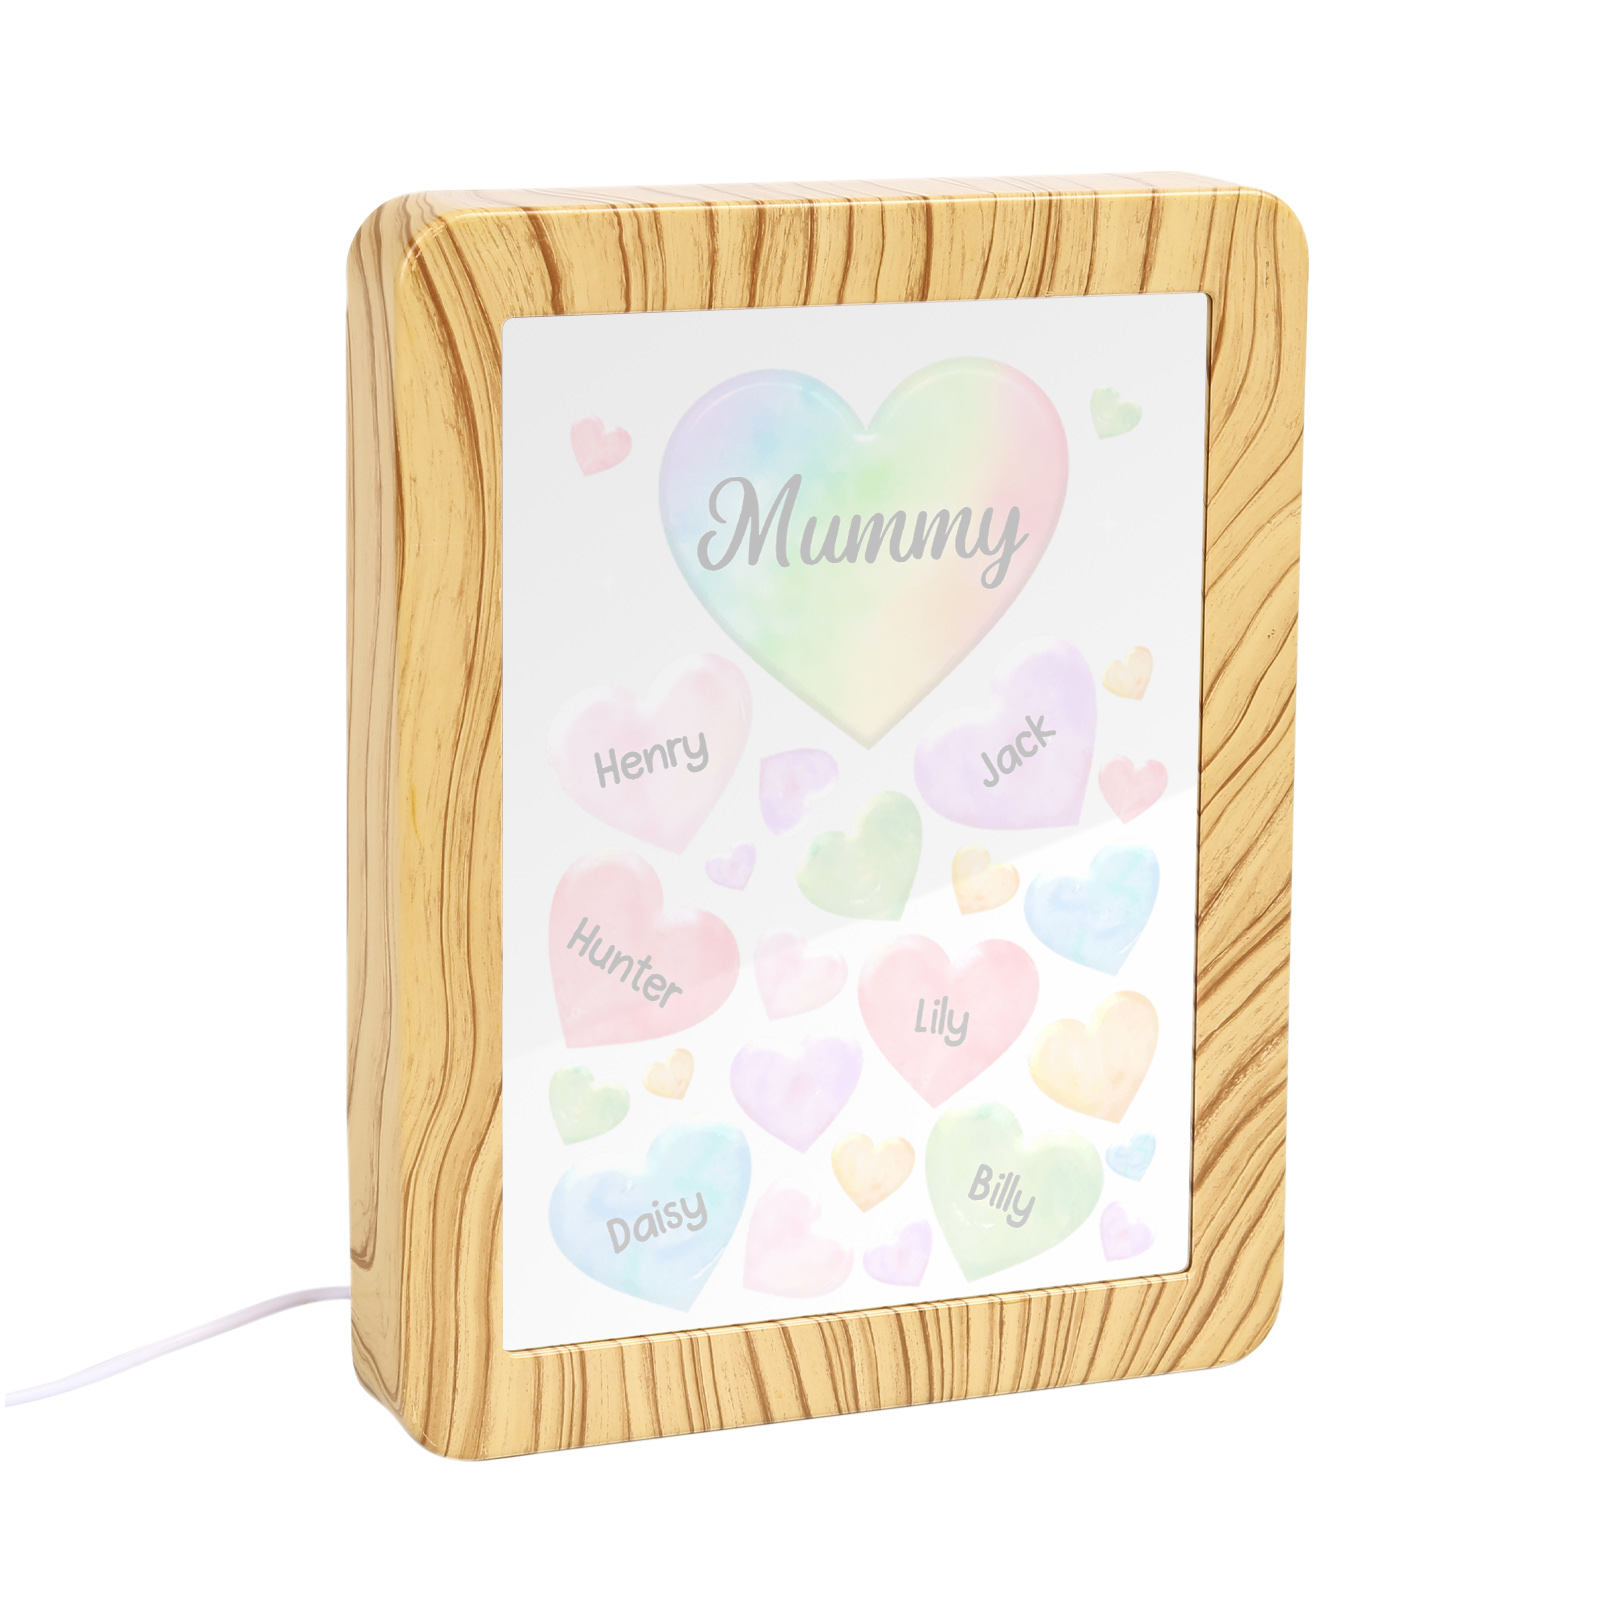 6 Names - Personalized Mom Home Wood Color Plug-in Mirror Photo Frame Custom Text LED Night Light Gift for Mom